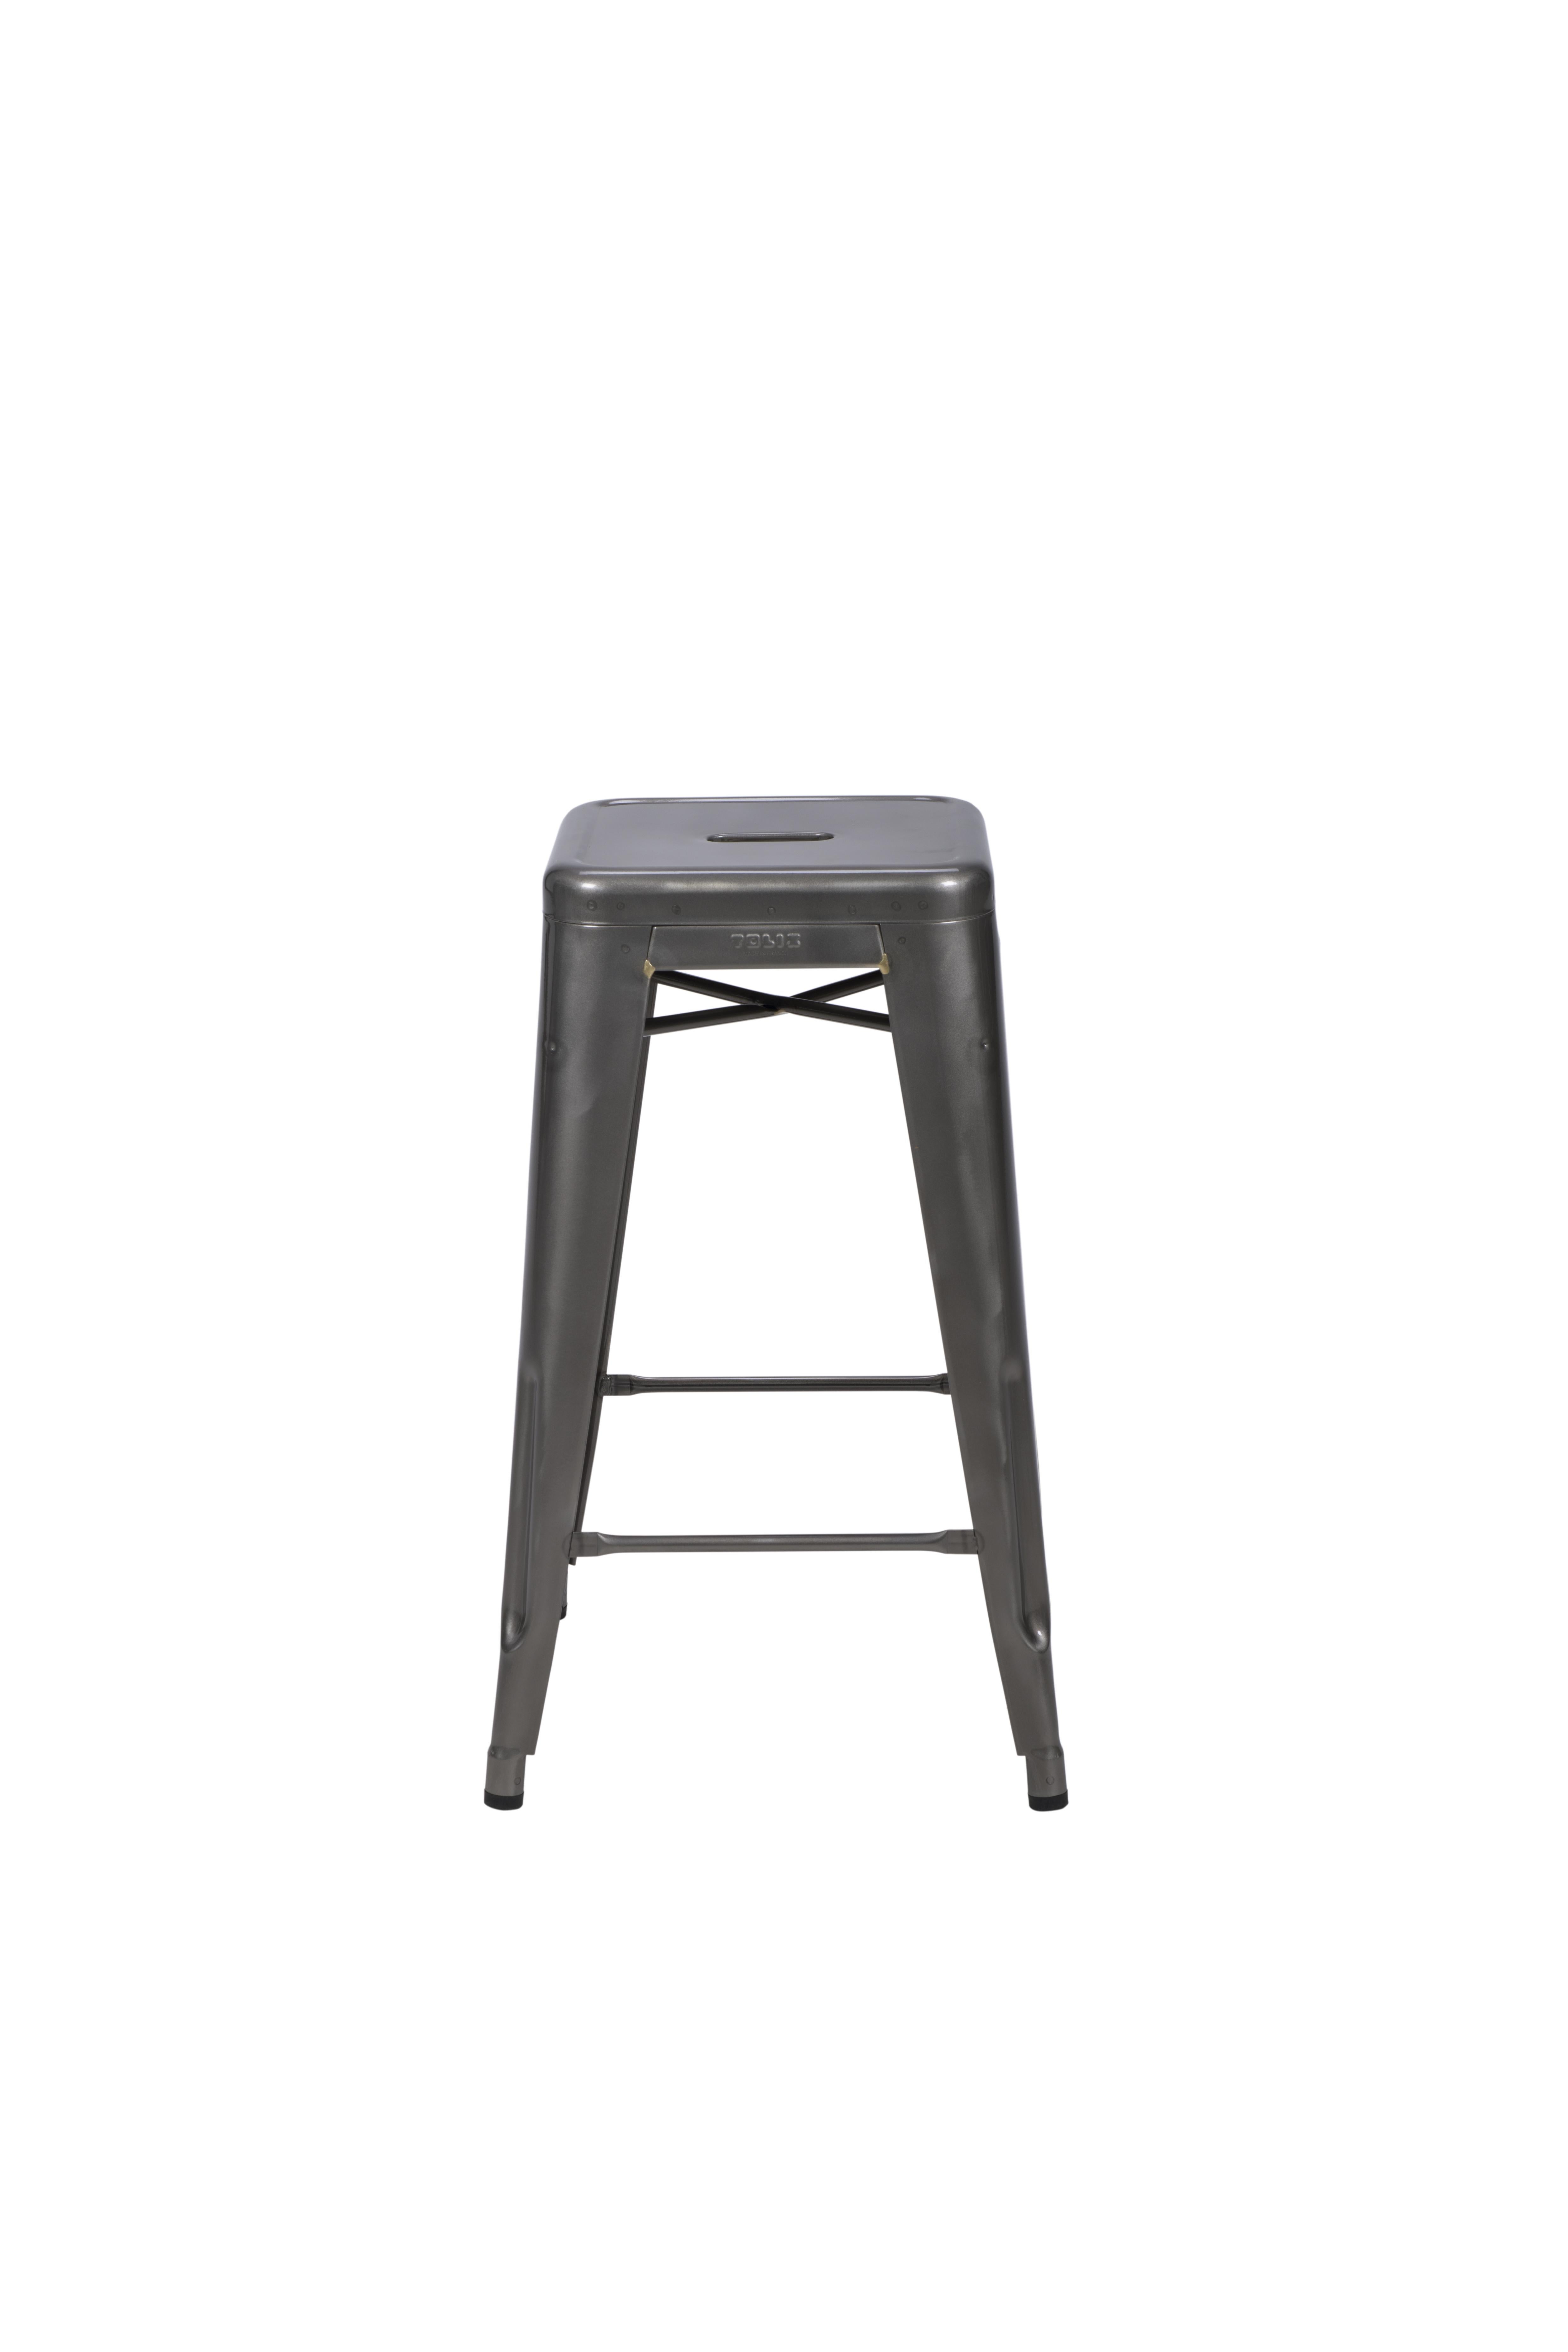 For Sale: Gray (Vernis Satiné) H Stool 65 in Essential Colors by Chantal Andriot and Tolix